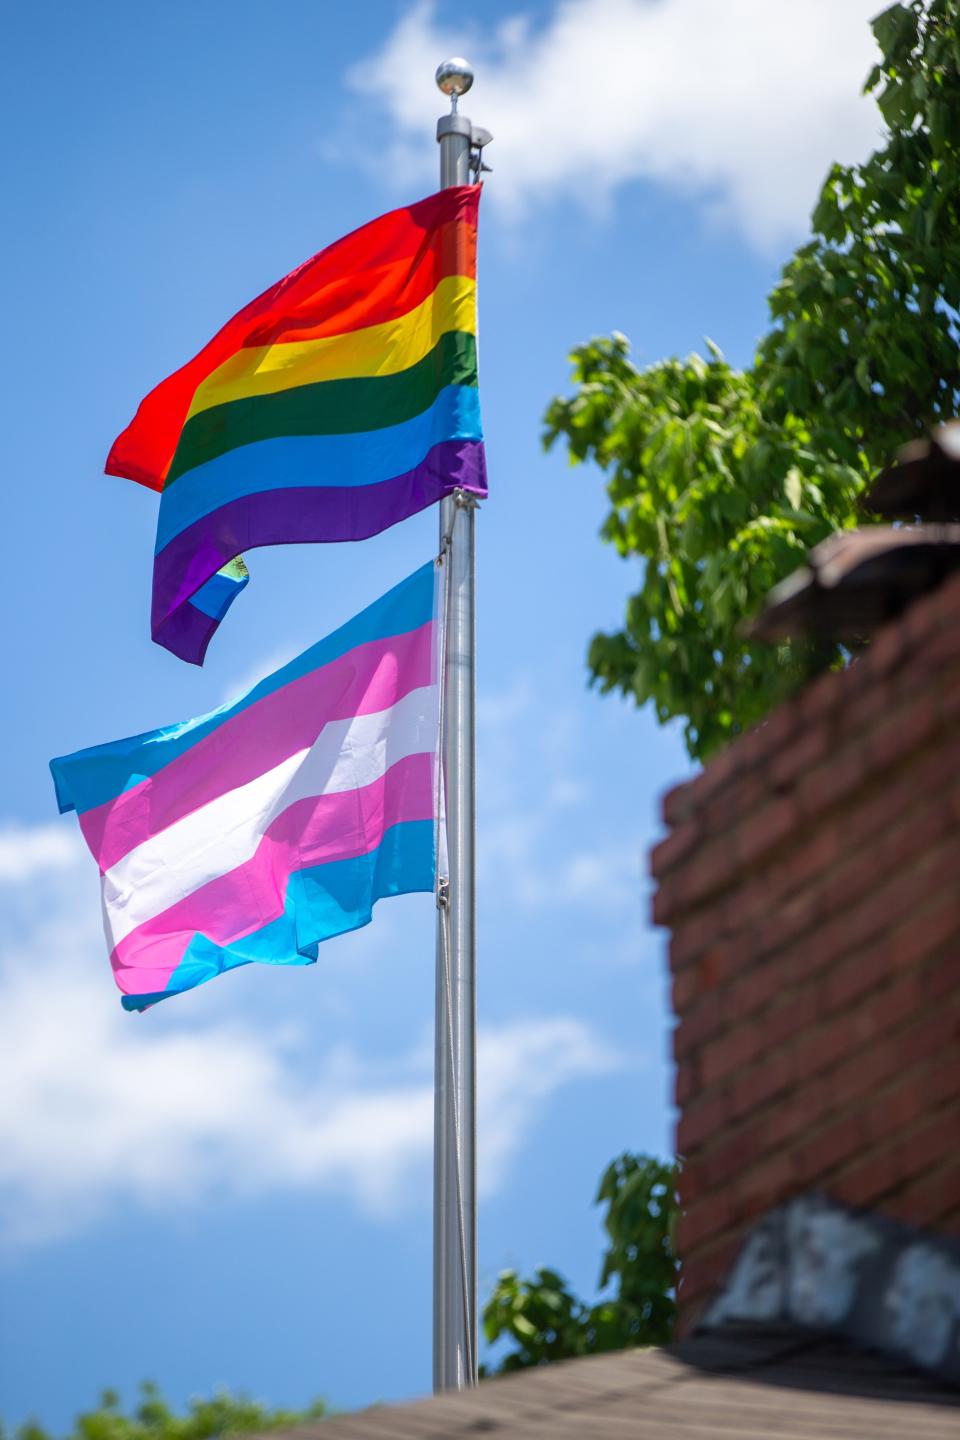 While the national VFW saluted LGBTQ+ veterans, Kansas VFW Commander James Langley criticized recognizing Pride Month.